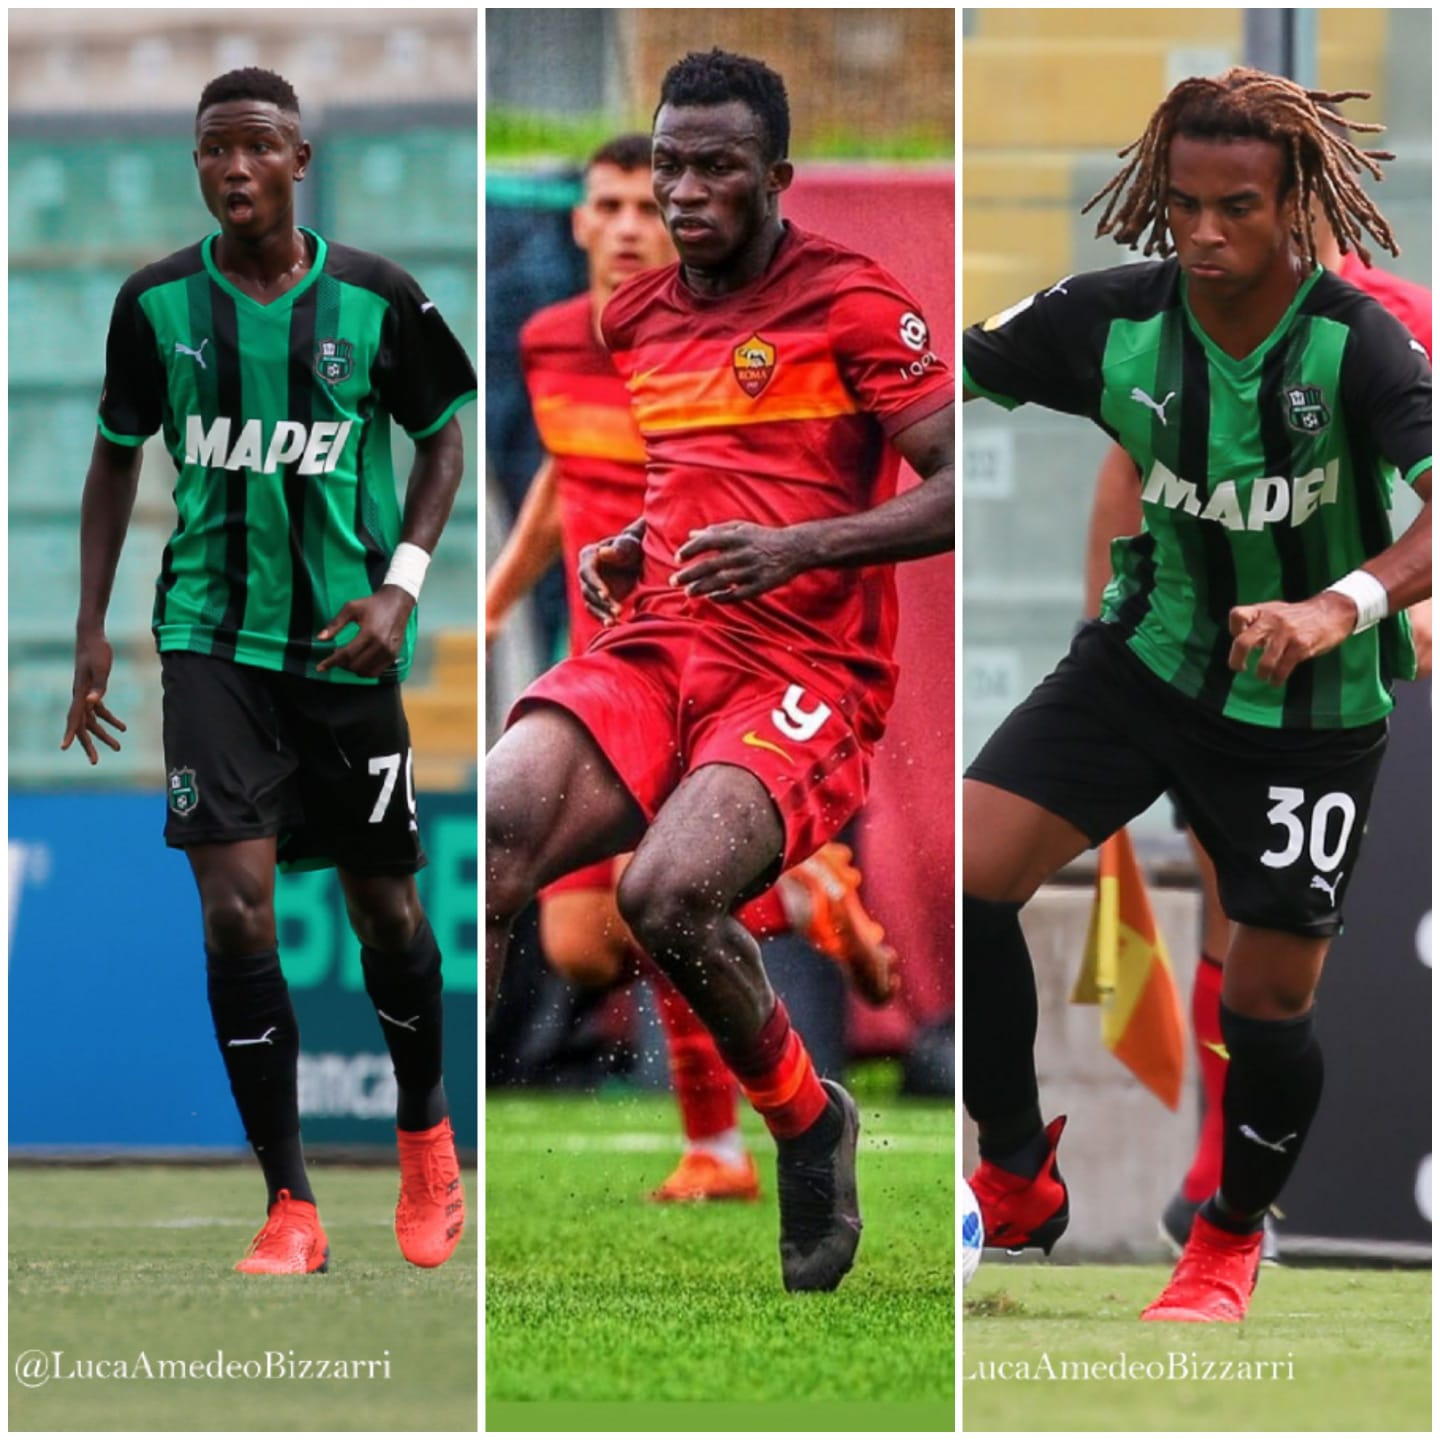 Performances of Ghanaian footballers in Italy's Youth Leagues: Kumi and Felix impress in Primavera opening matches